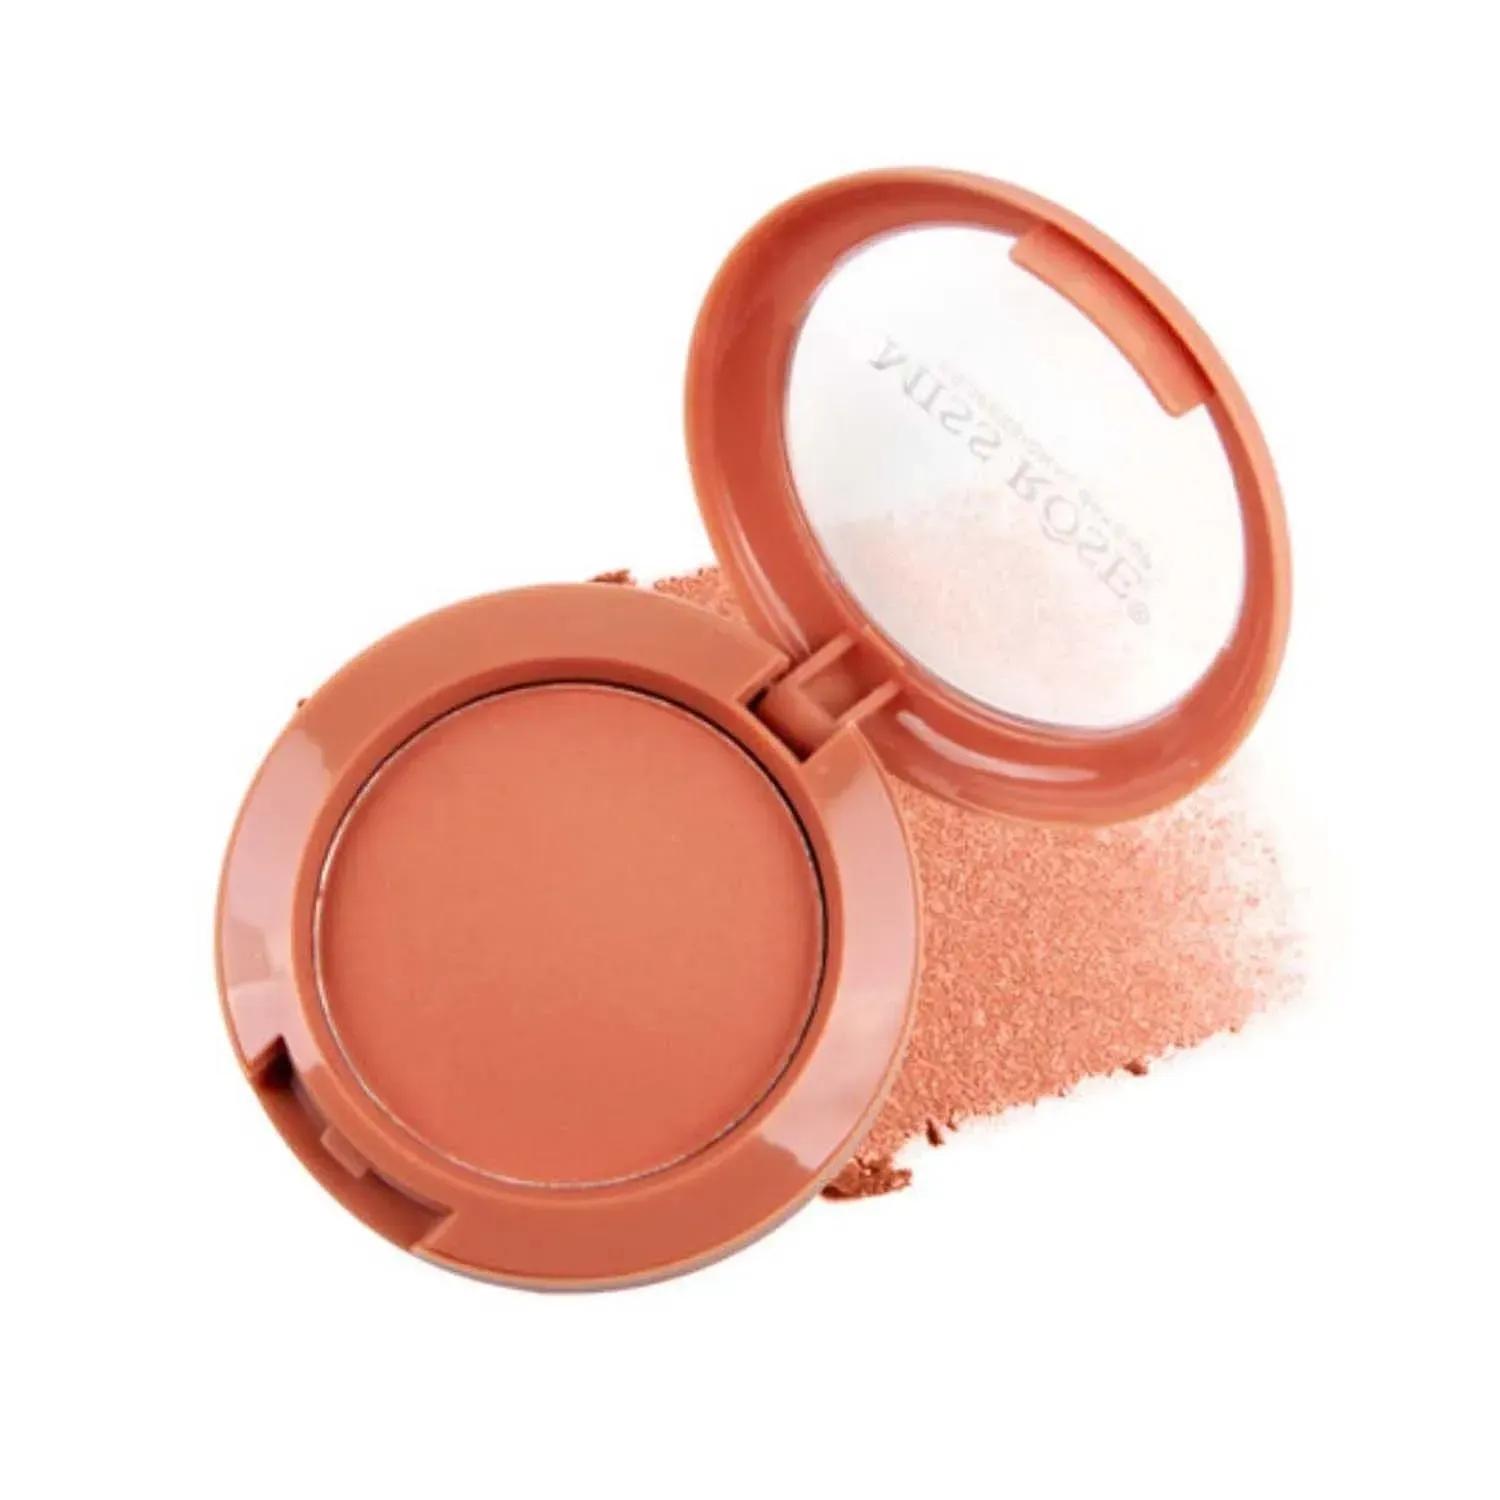 miss-rose-professional-high-pigmented-blusher---02-tan-nude-(20g)